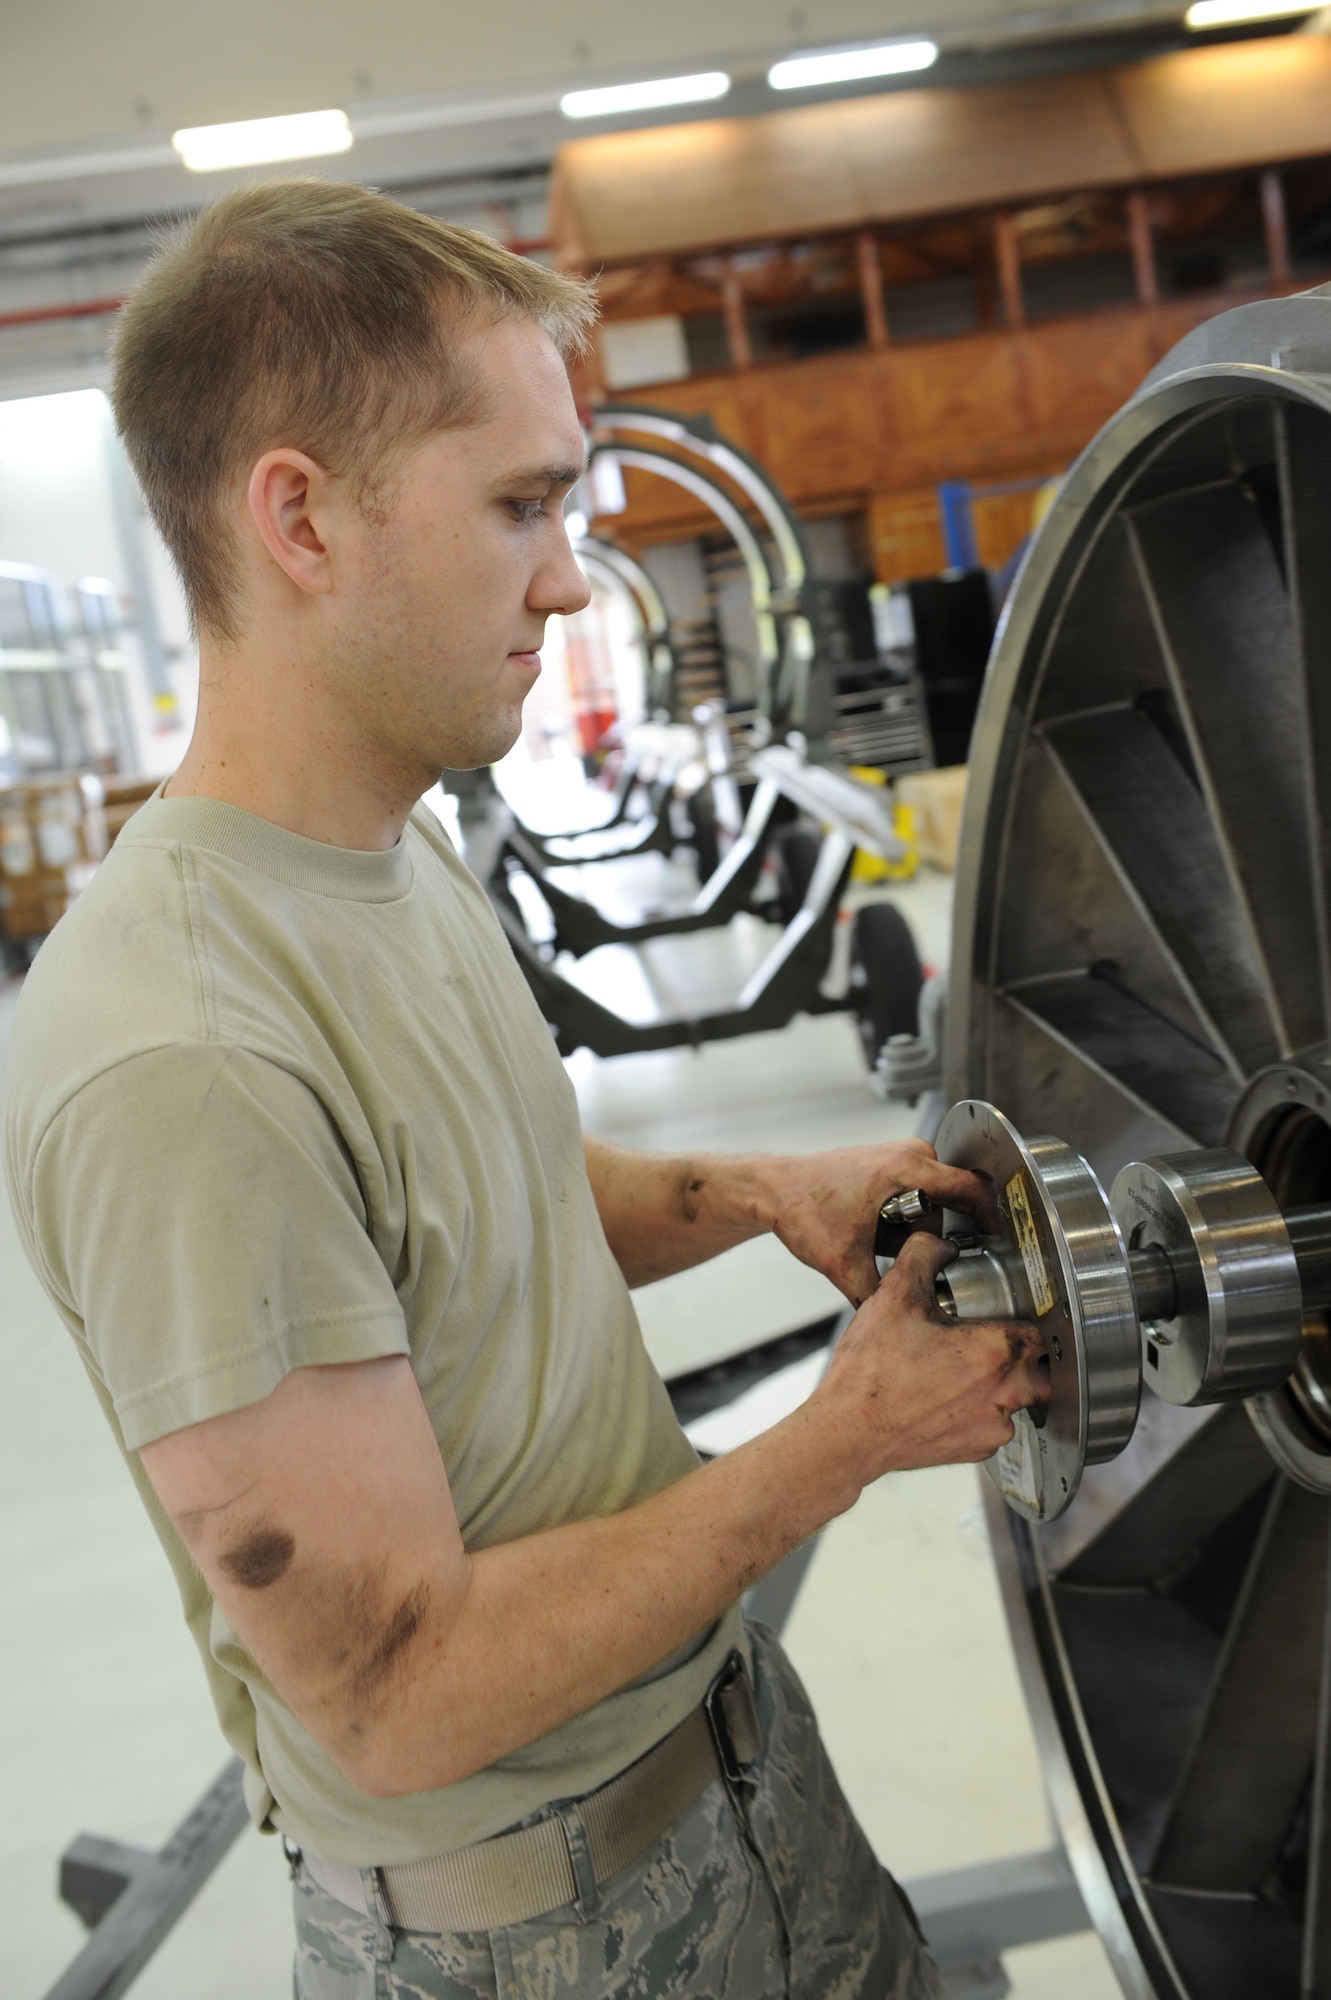 SPANGDAHLEM AIR BASE, Germany – Senior Airman Braden Duke, 52nd Component Maintenance Squadron aerospace propulsion technician, takes apart the front frame of an F-16 Fighting Falcon turbine during the removal of all the moving parts of the engine at Bldg. 73 here April 30. Technicians replace all these parts of the engine at Bldg. 73 here April 30. Technicians replace these moving parts in a turbine every 4,000 flight hours as required by the service life extension program. CMS provides maintenance support to the 52nd Fighter Wing, the 31st FW at Aviano AB, Italy, and all U.S. F-16 units powered by F-110 engines in the European theater and deployed locations. (U.S. Air Force photo by Senior Airman Christopher Toon/Released)